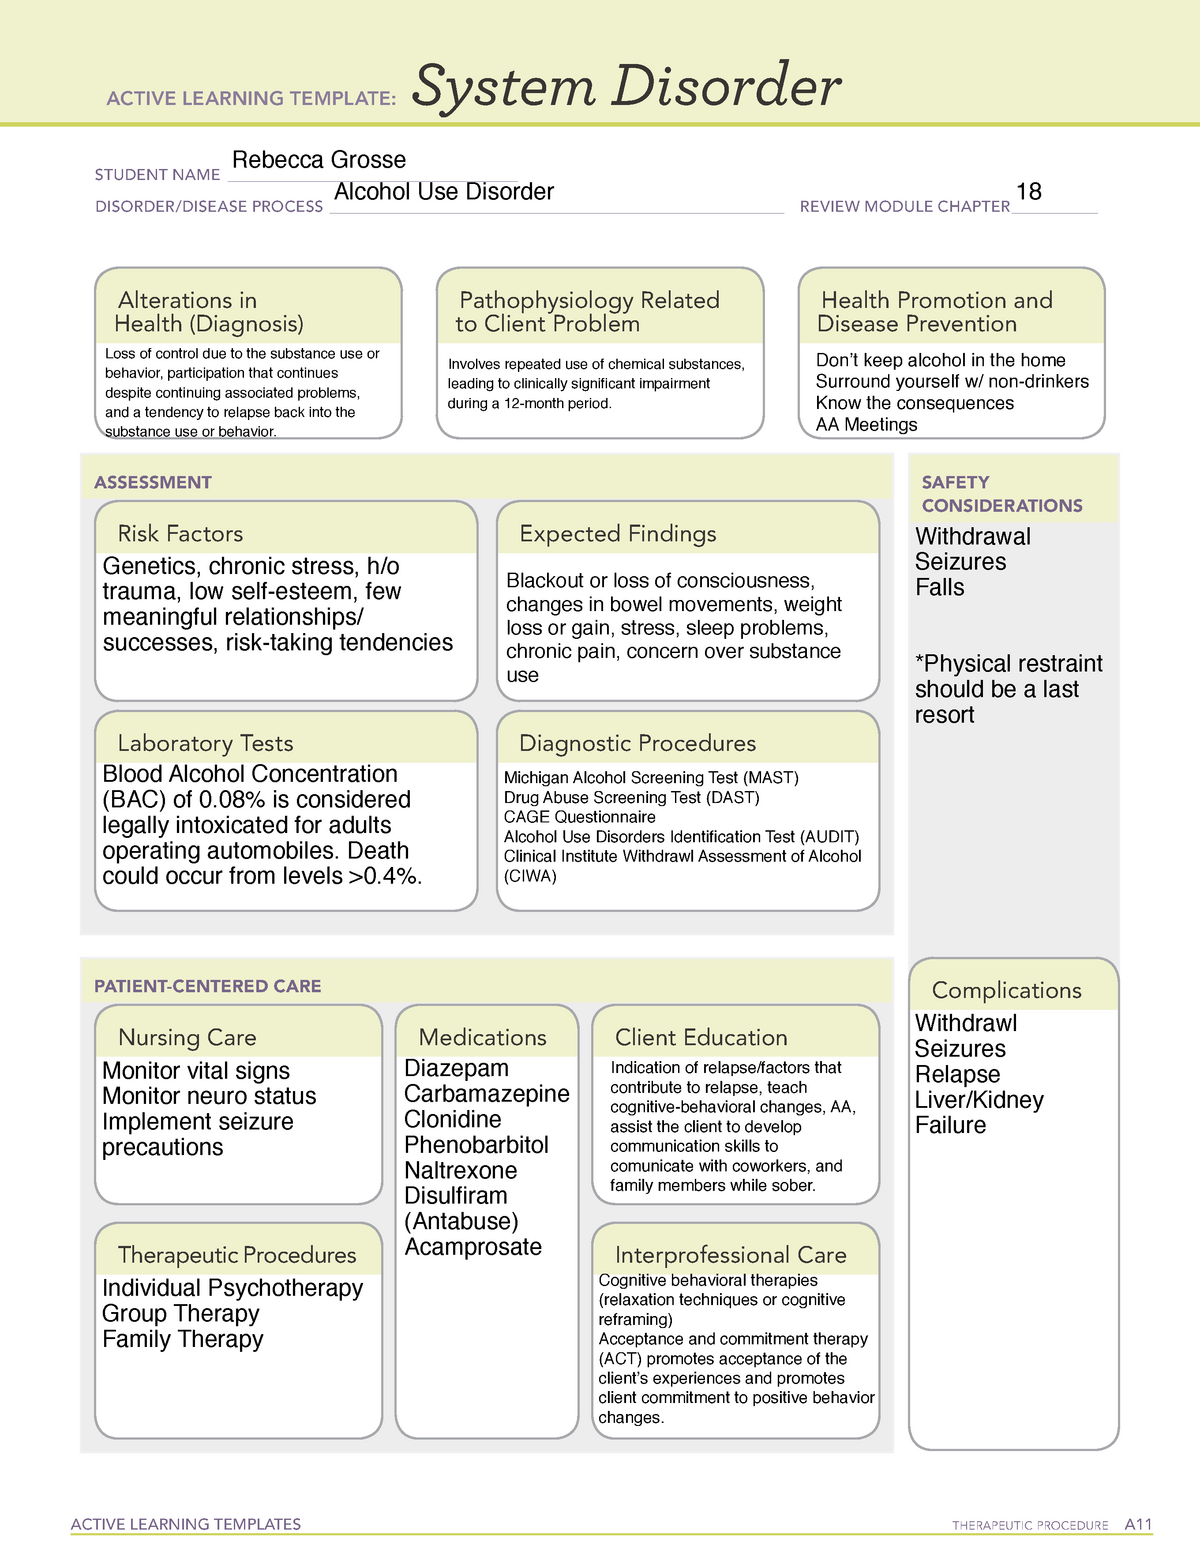 Active Learning Template Alcohol Abuse ACTIVE LEARNING TEMPLATES